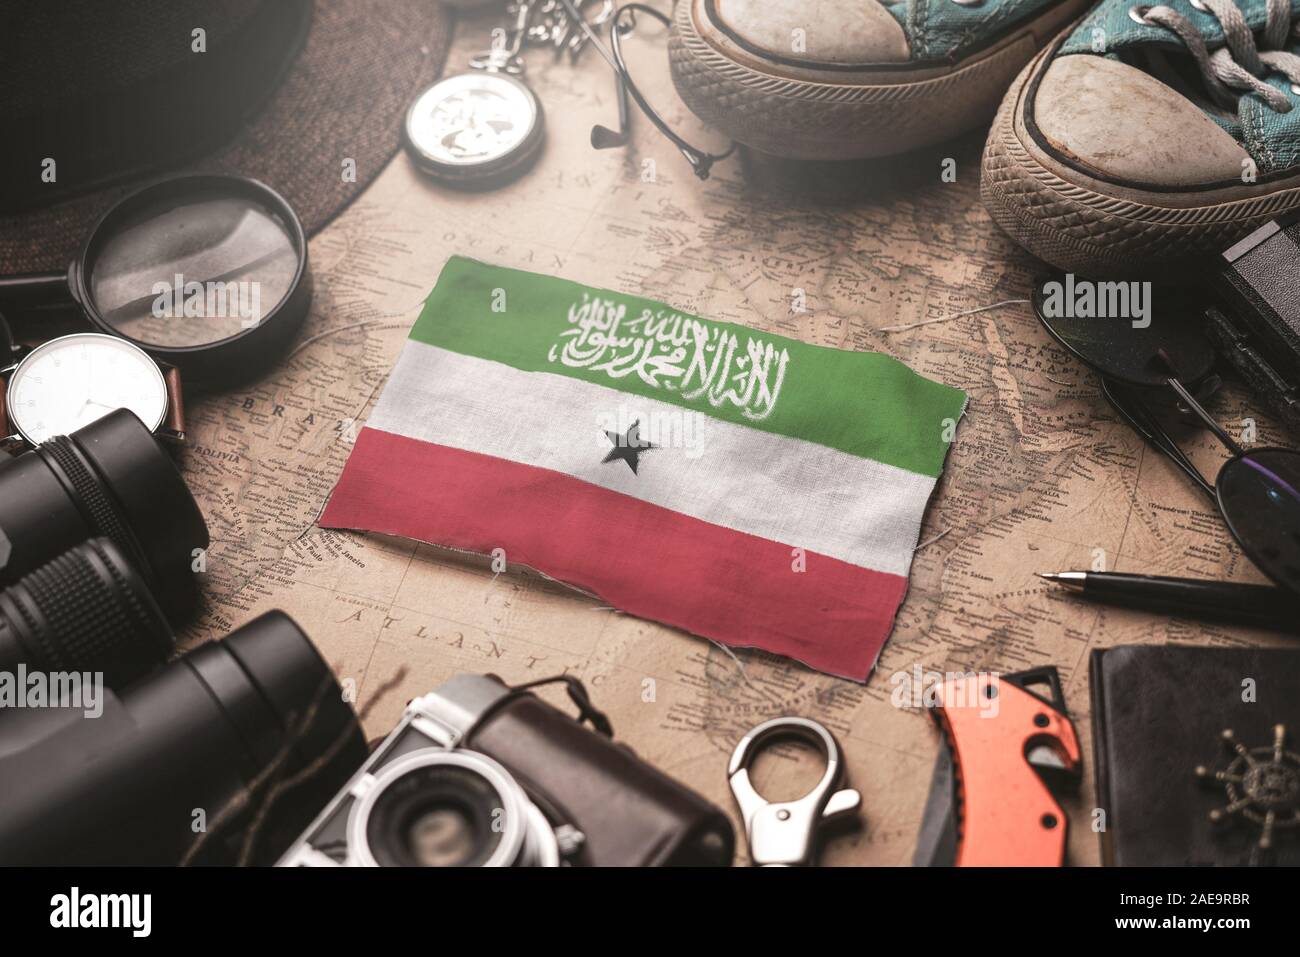 Somaliland Flag Between Traveler's Accessories on Old Vintage Map. Tourist Destination Concept. Stock Photo